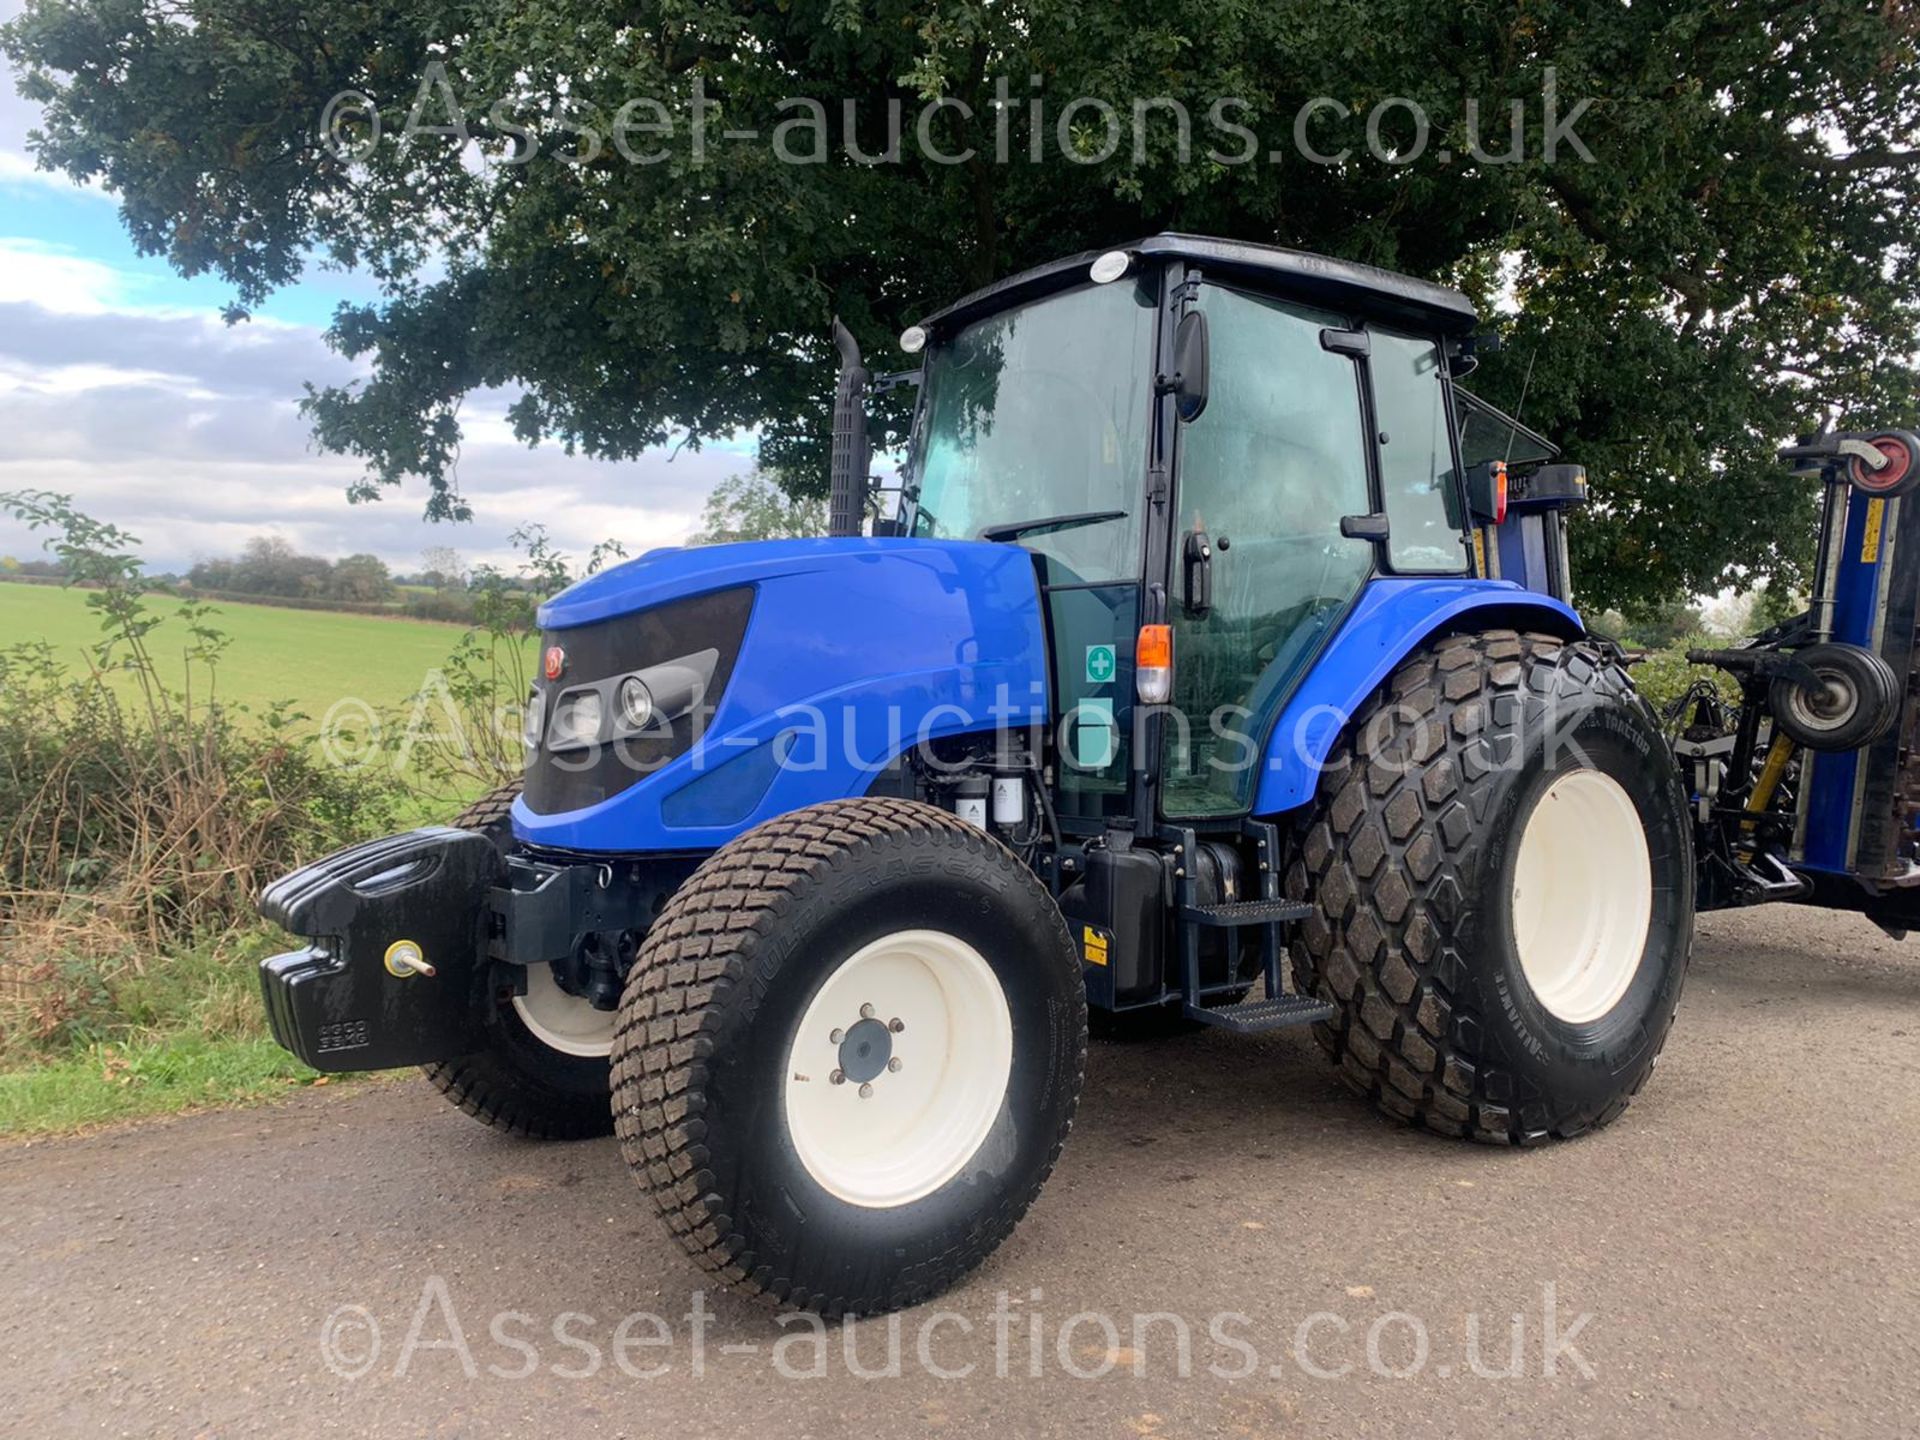 2014 ISEKI TJA8080 86hp 4WD TRACTOR, RUNS DRIVES AND WORKS, SHOWING A LOW AN GENUINE 960 HOURS - Image 2 of 10